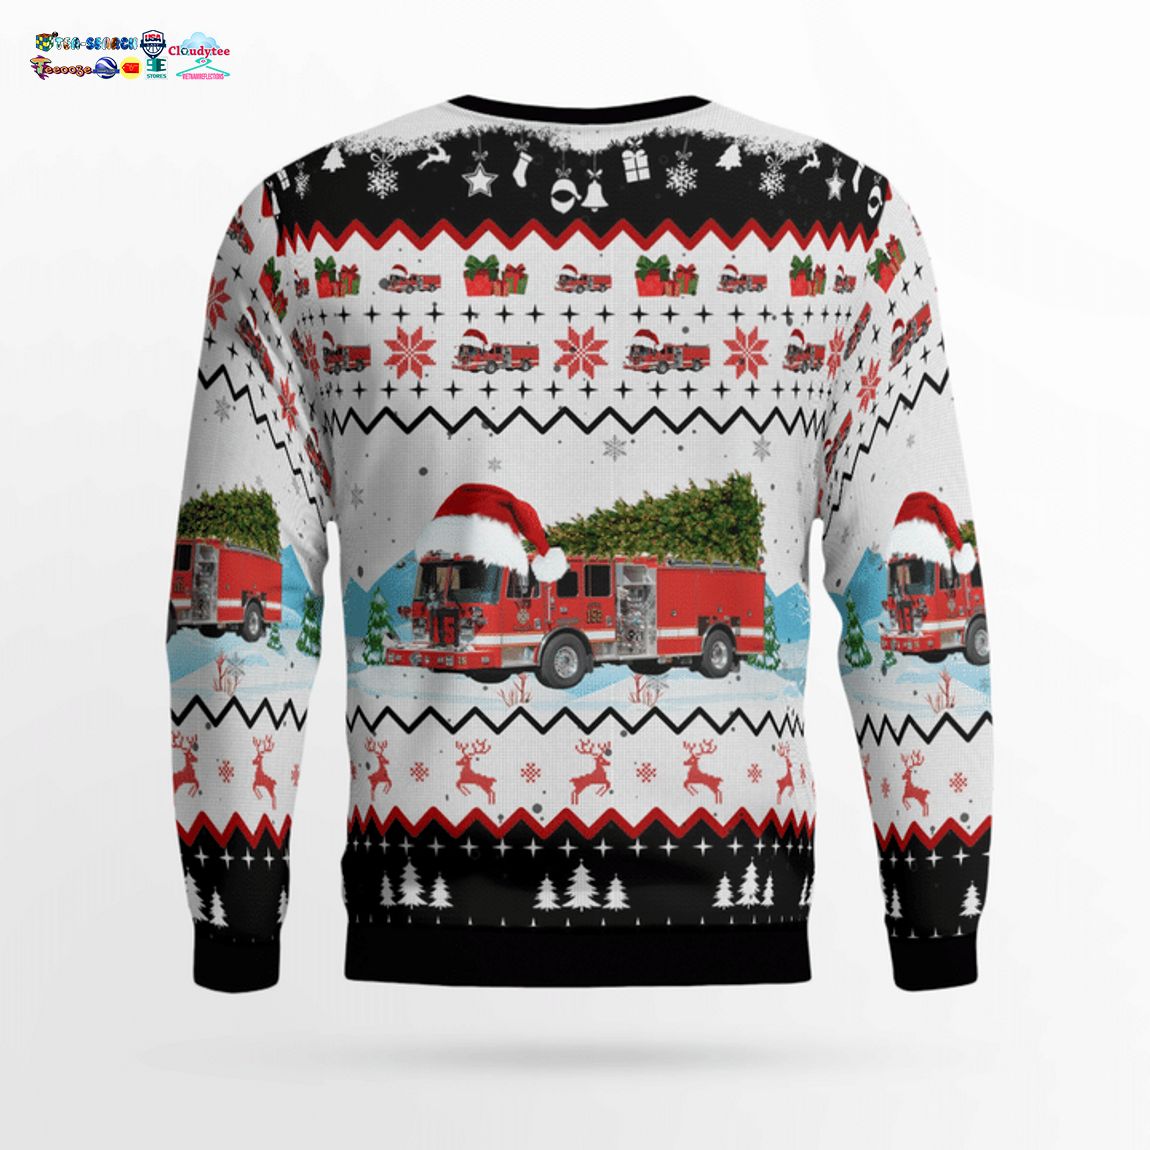 Maryland New Market District Volunteer Fire Company 3D Christmas Sweater